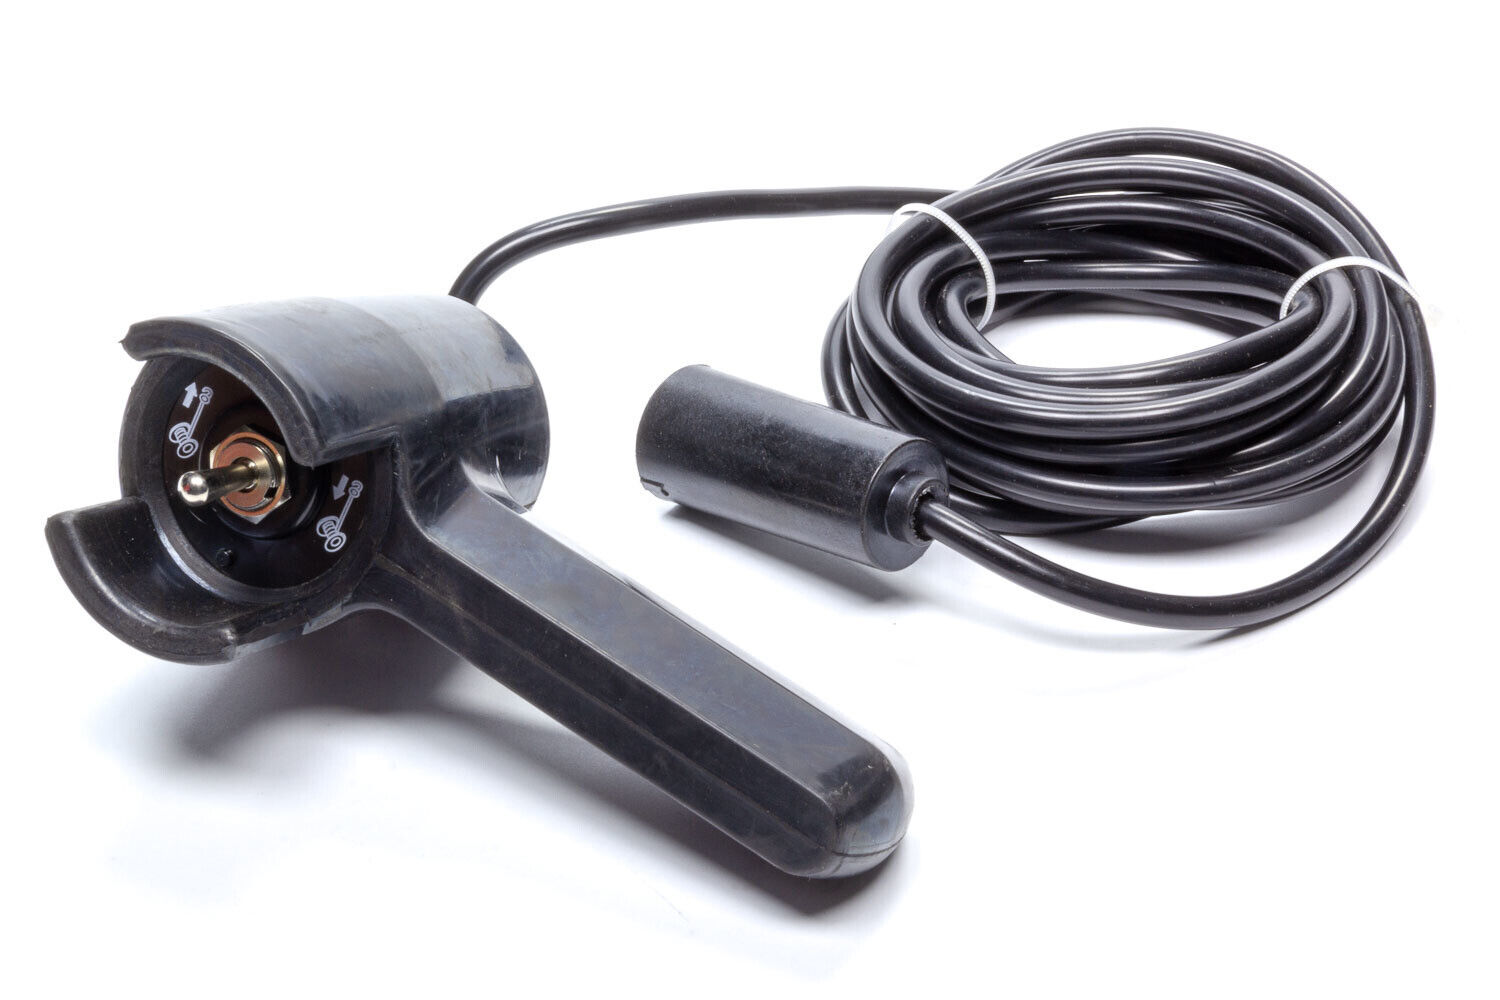 Warn 80172 Winch Remote Hand Held Controller Toggle Forward/Reverse Plug-In